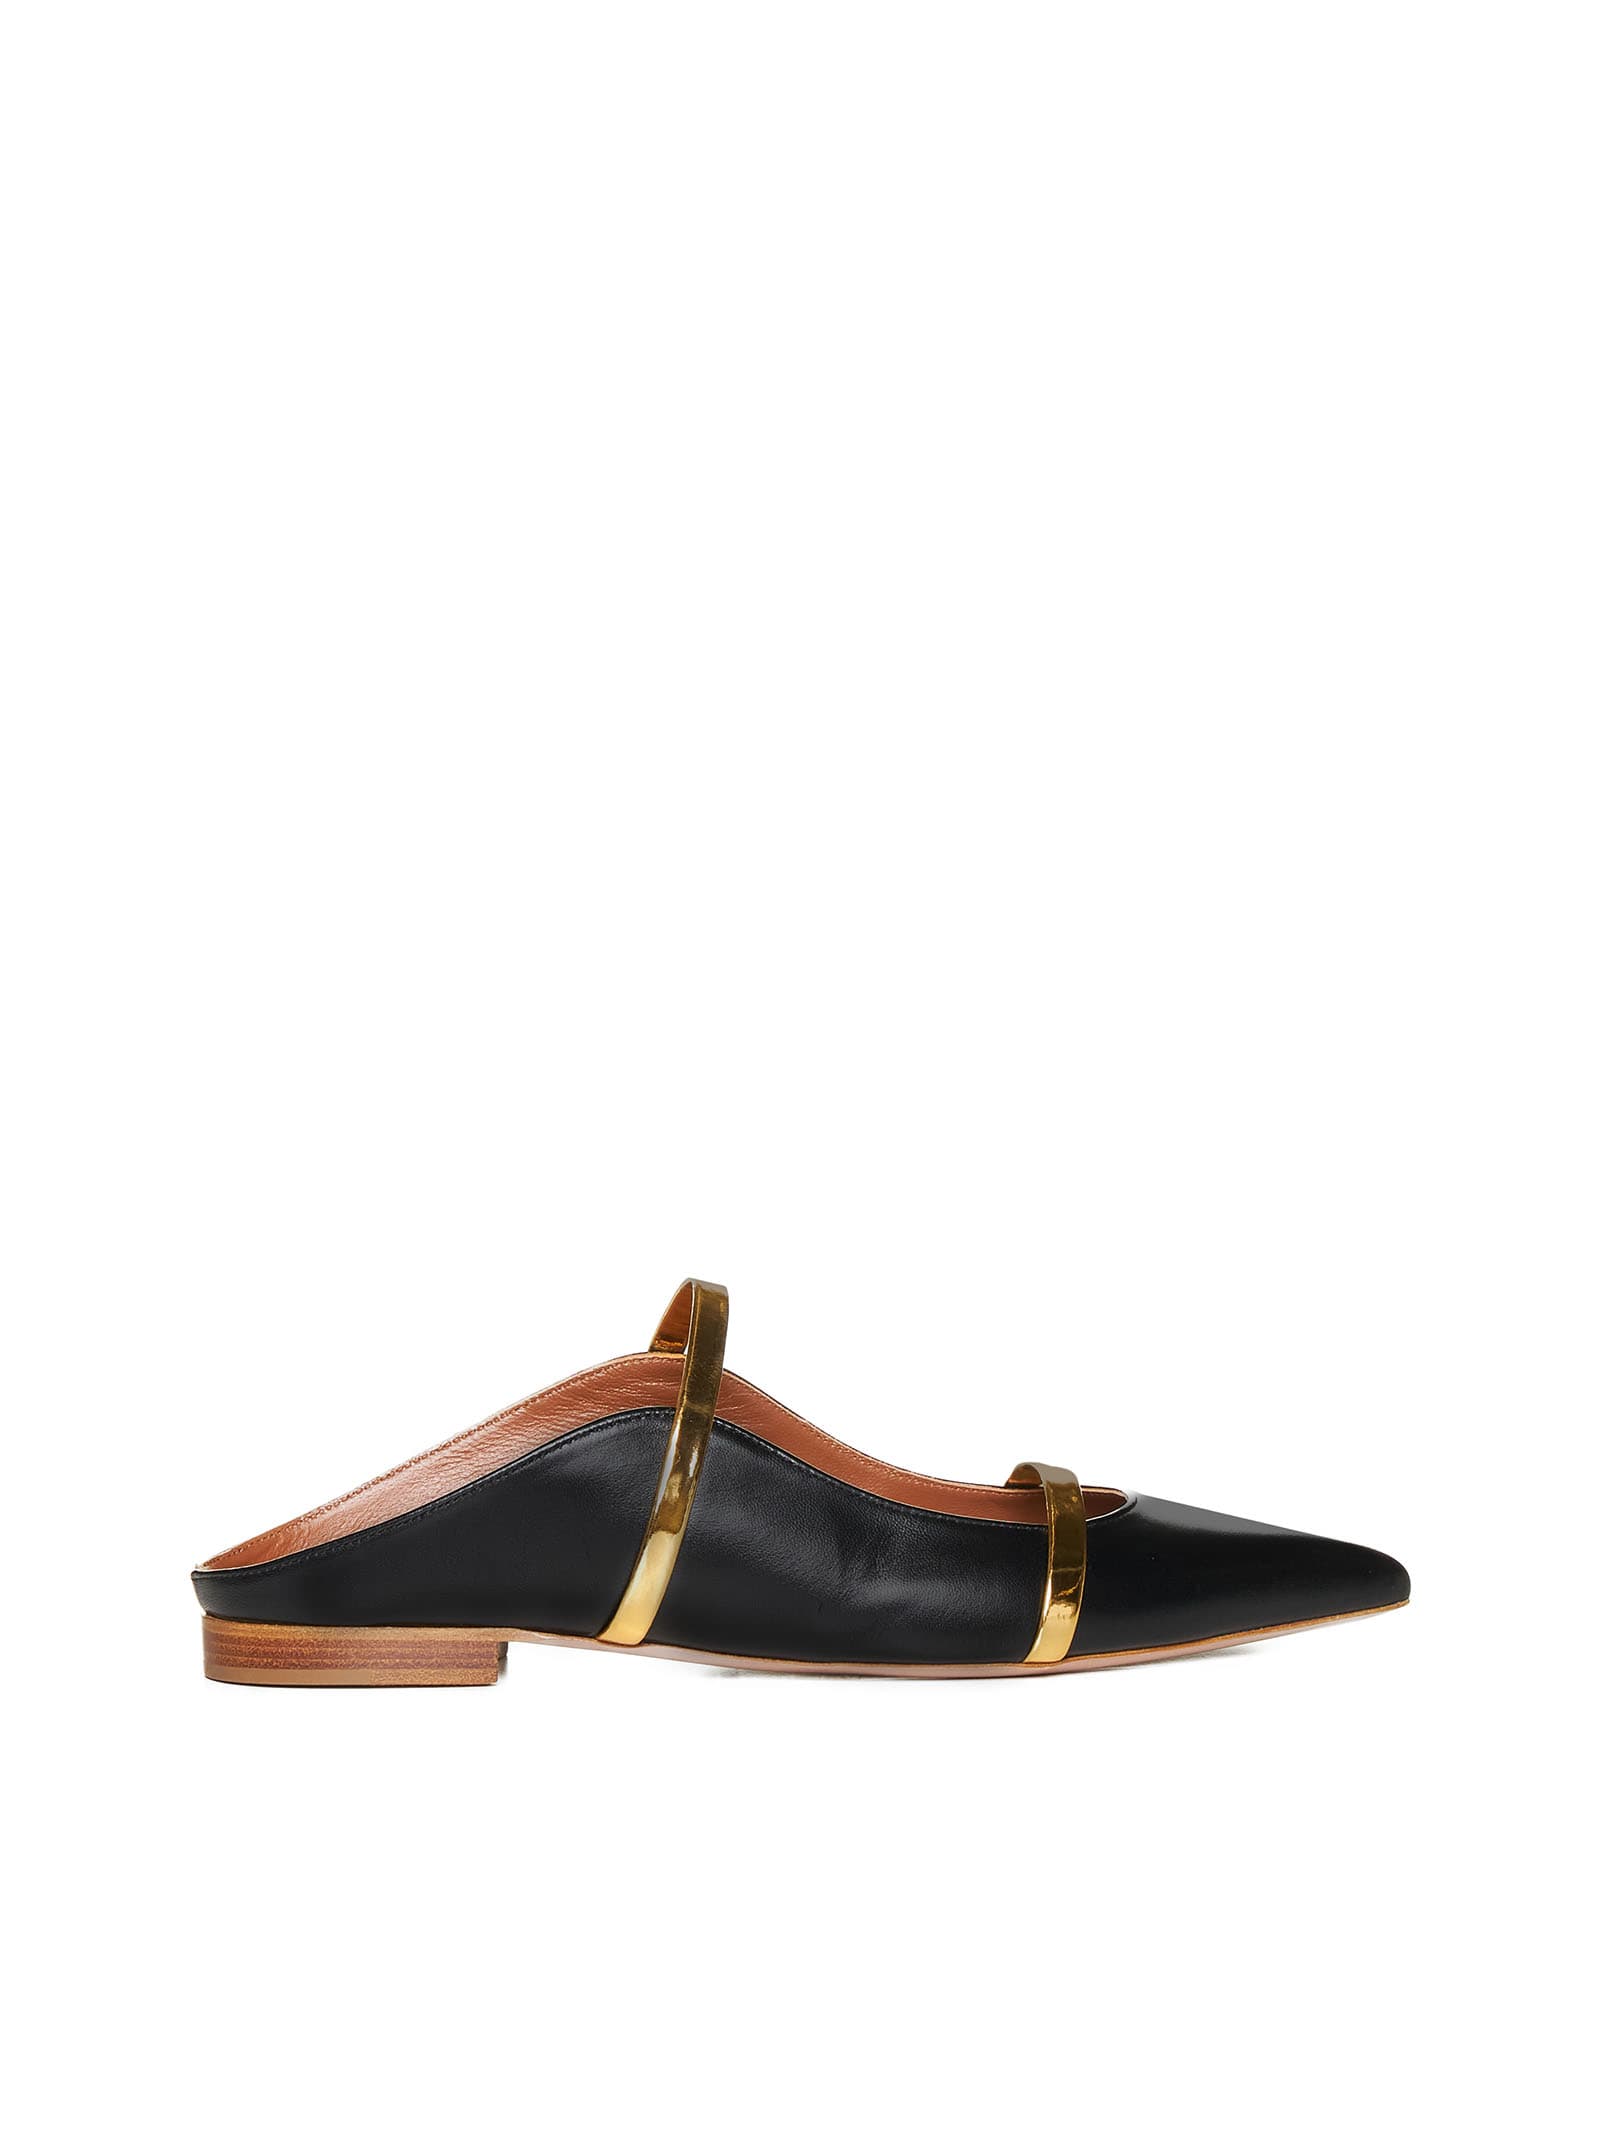 MALONE SOULIERS FLAT SHOES